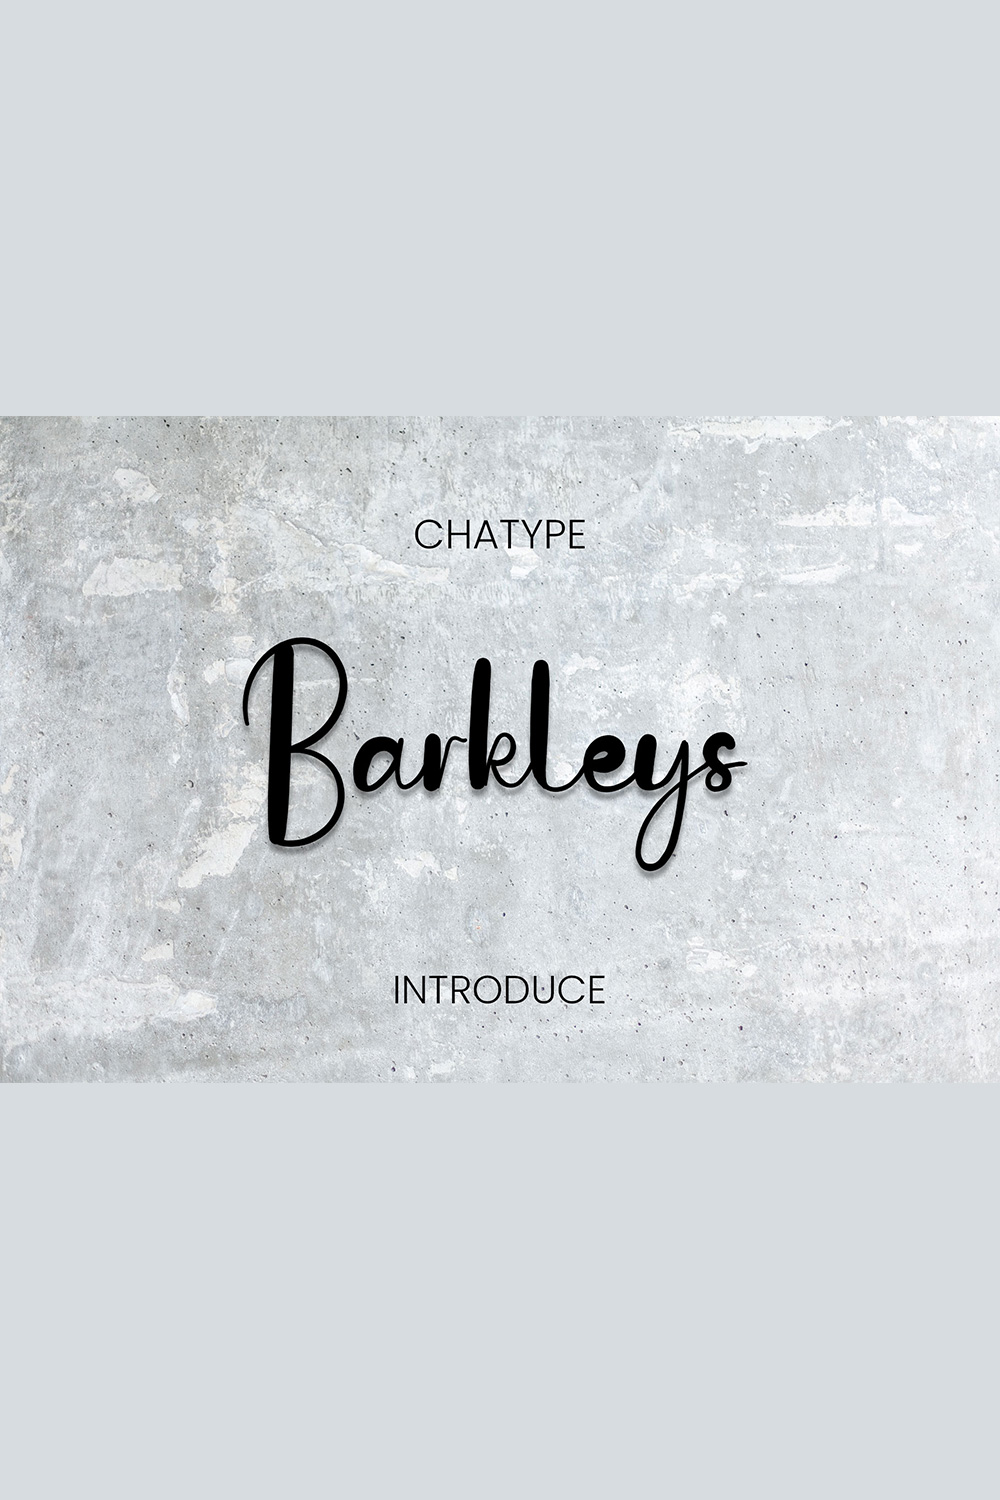 Image with text showing colorful Barkleys typeface